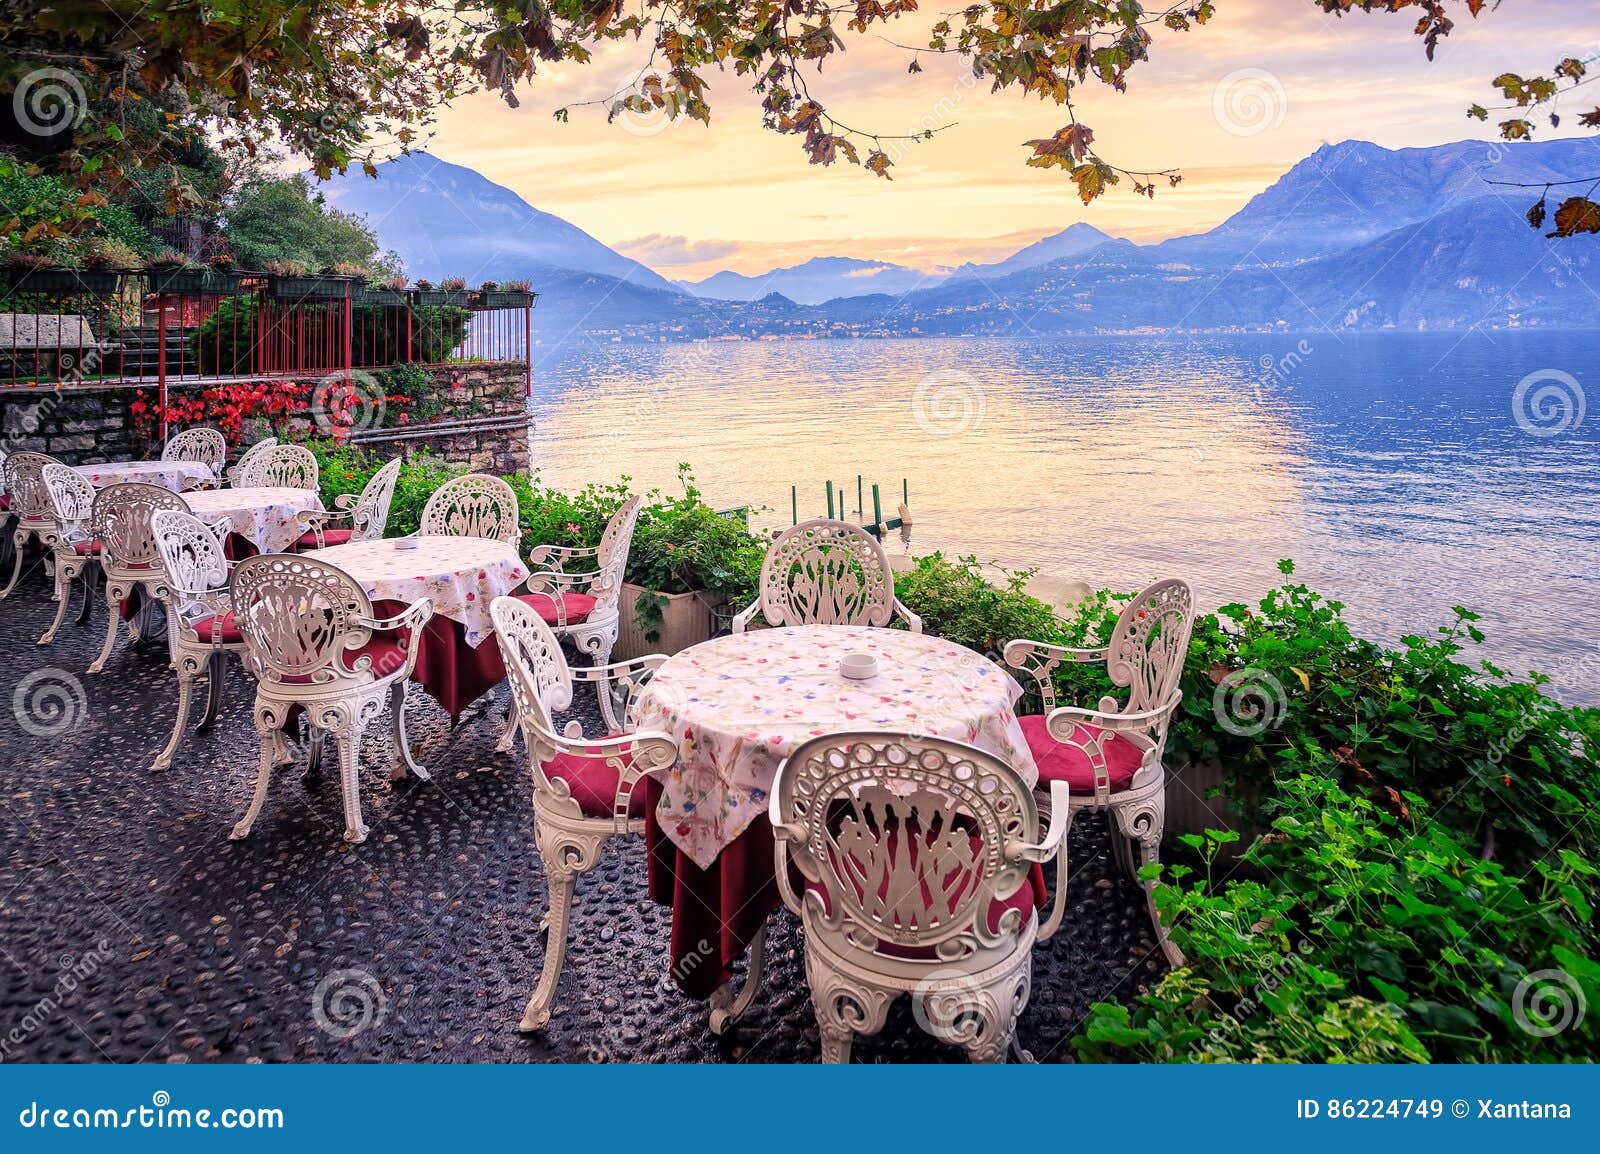 lake como and alps mountains on sunset, italy